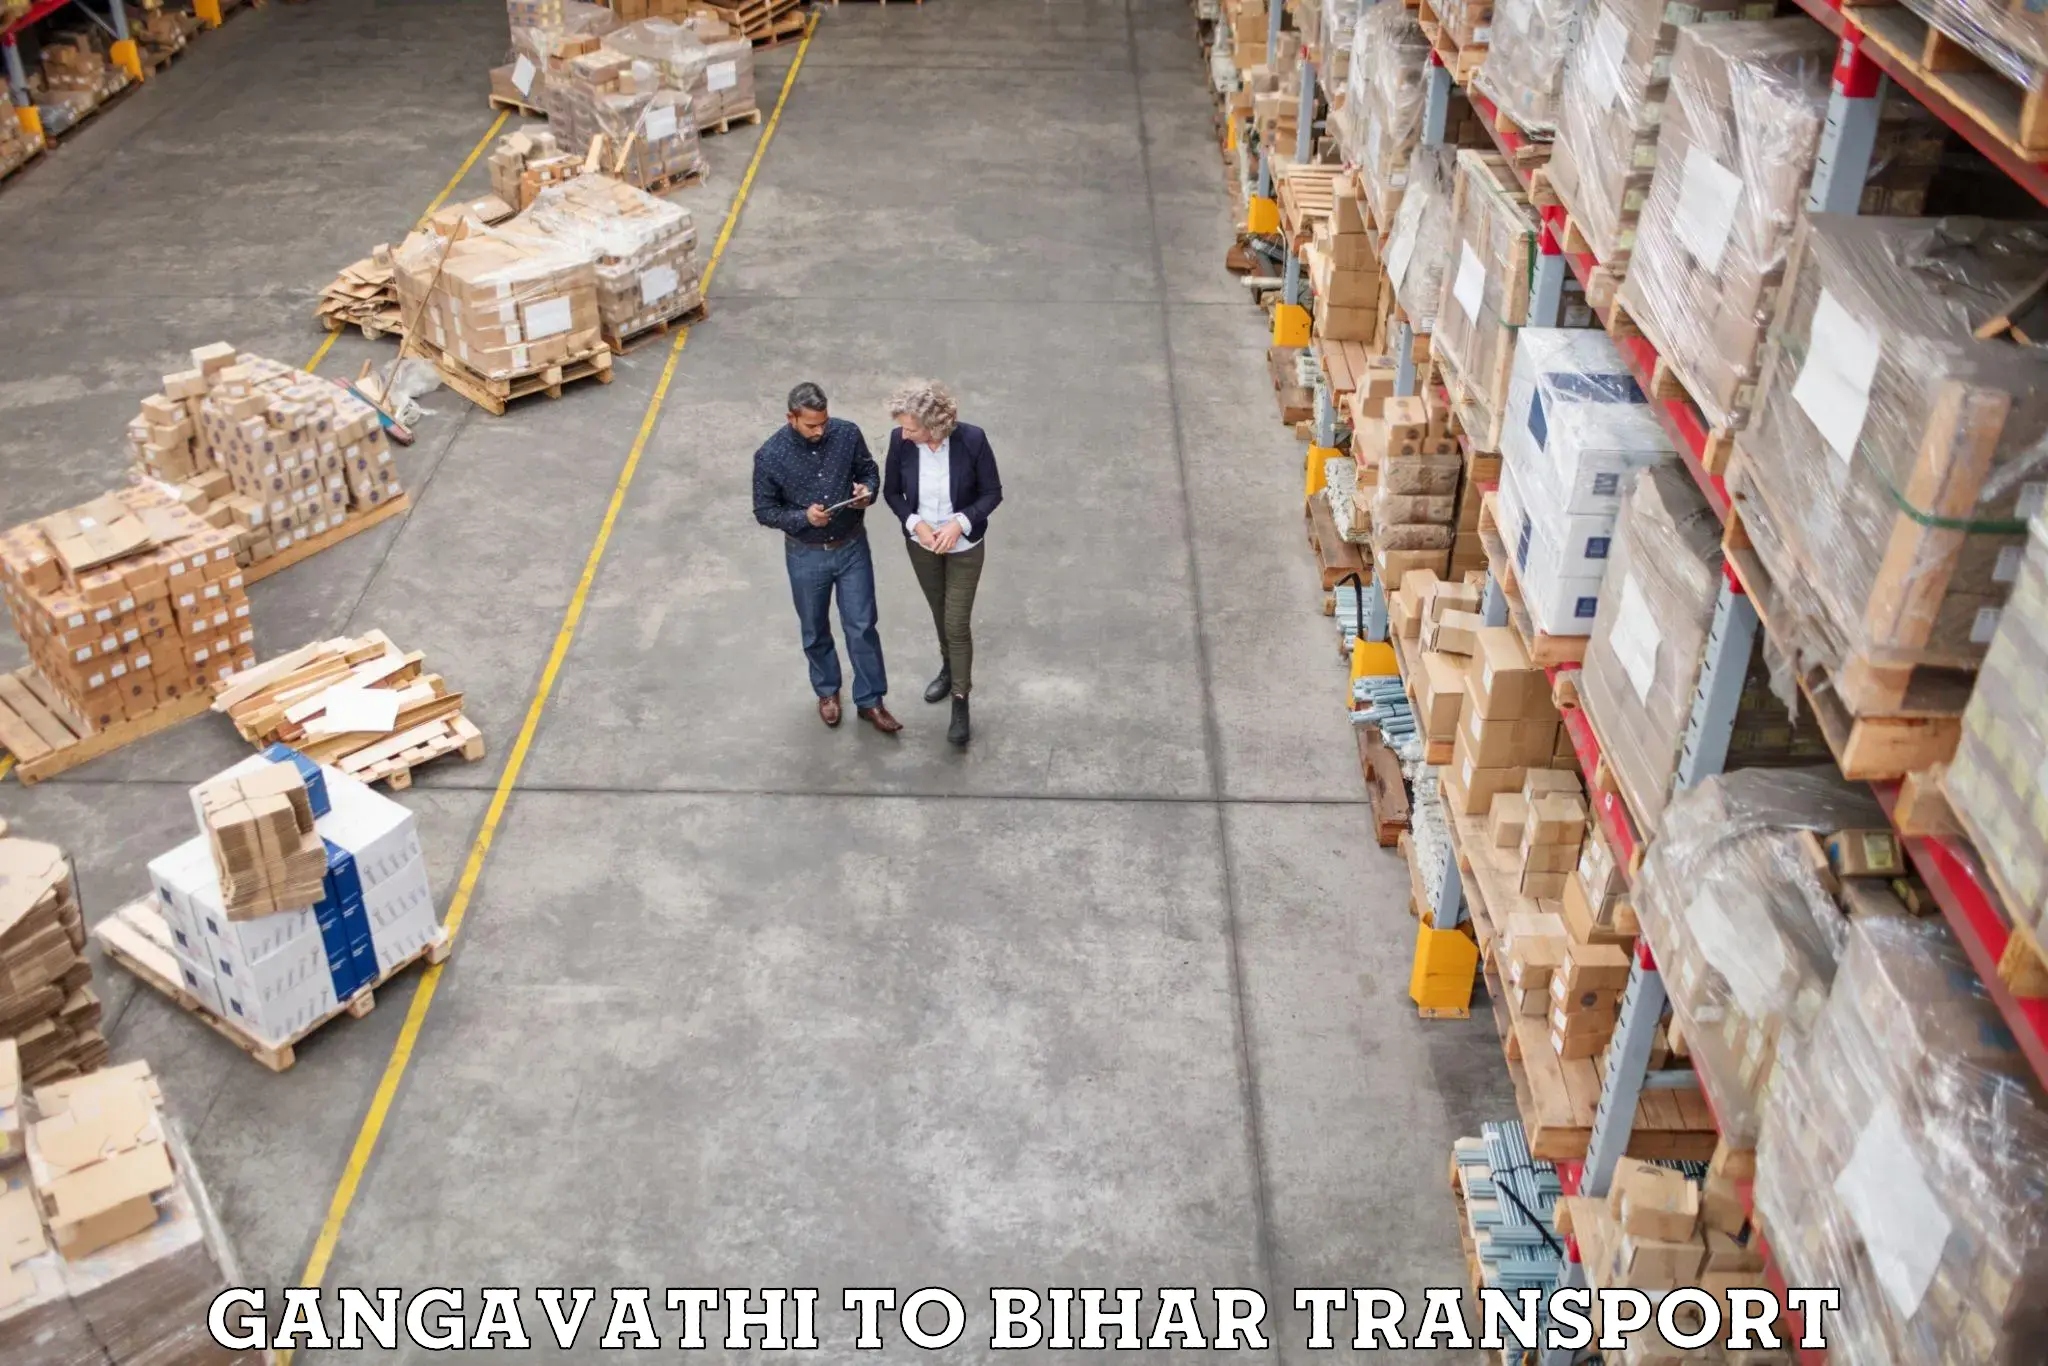 Transport bike from one state to another Gangavathi to Bihar